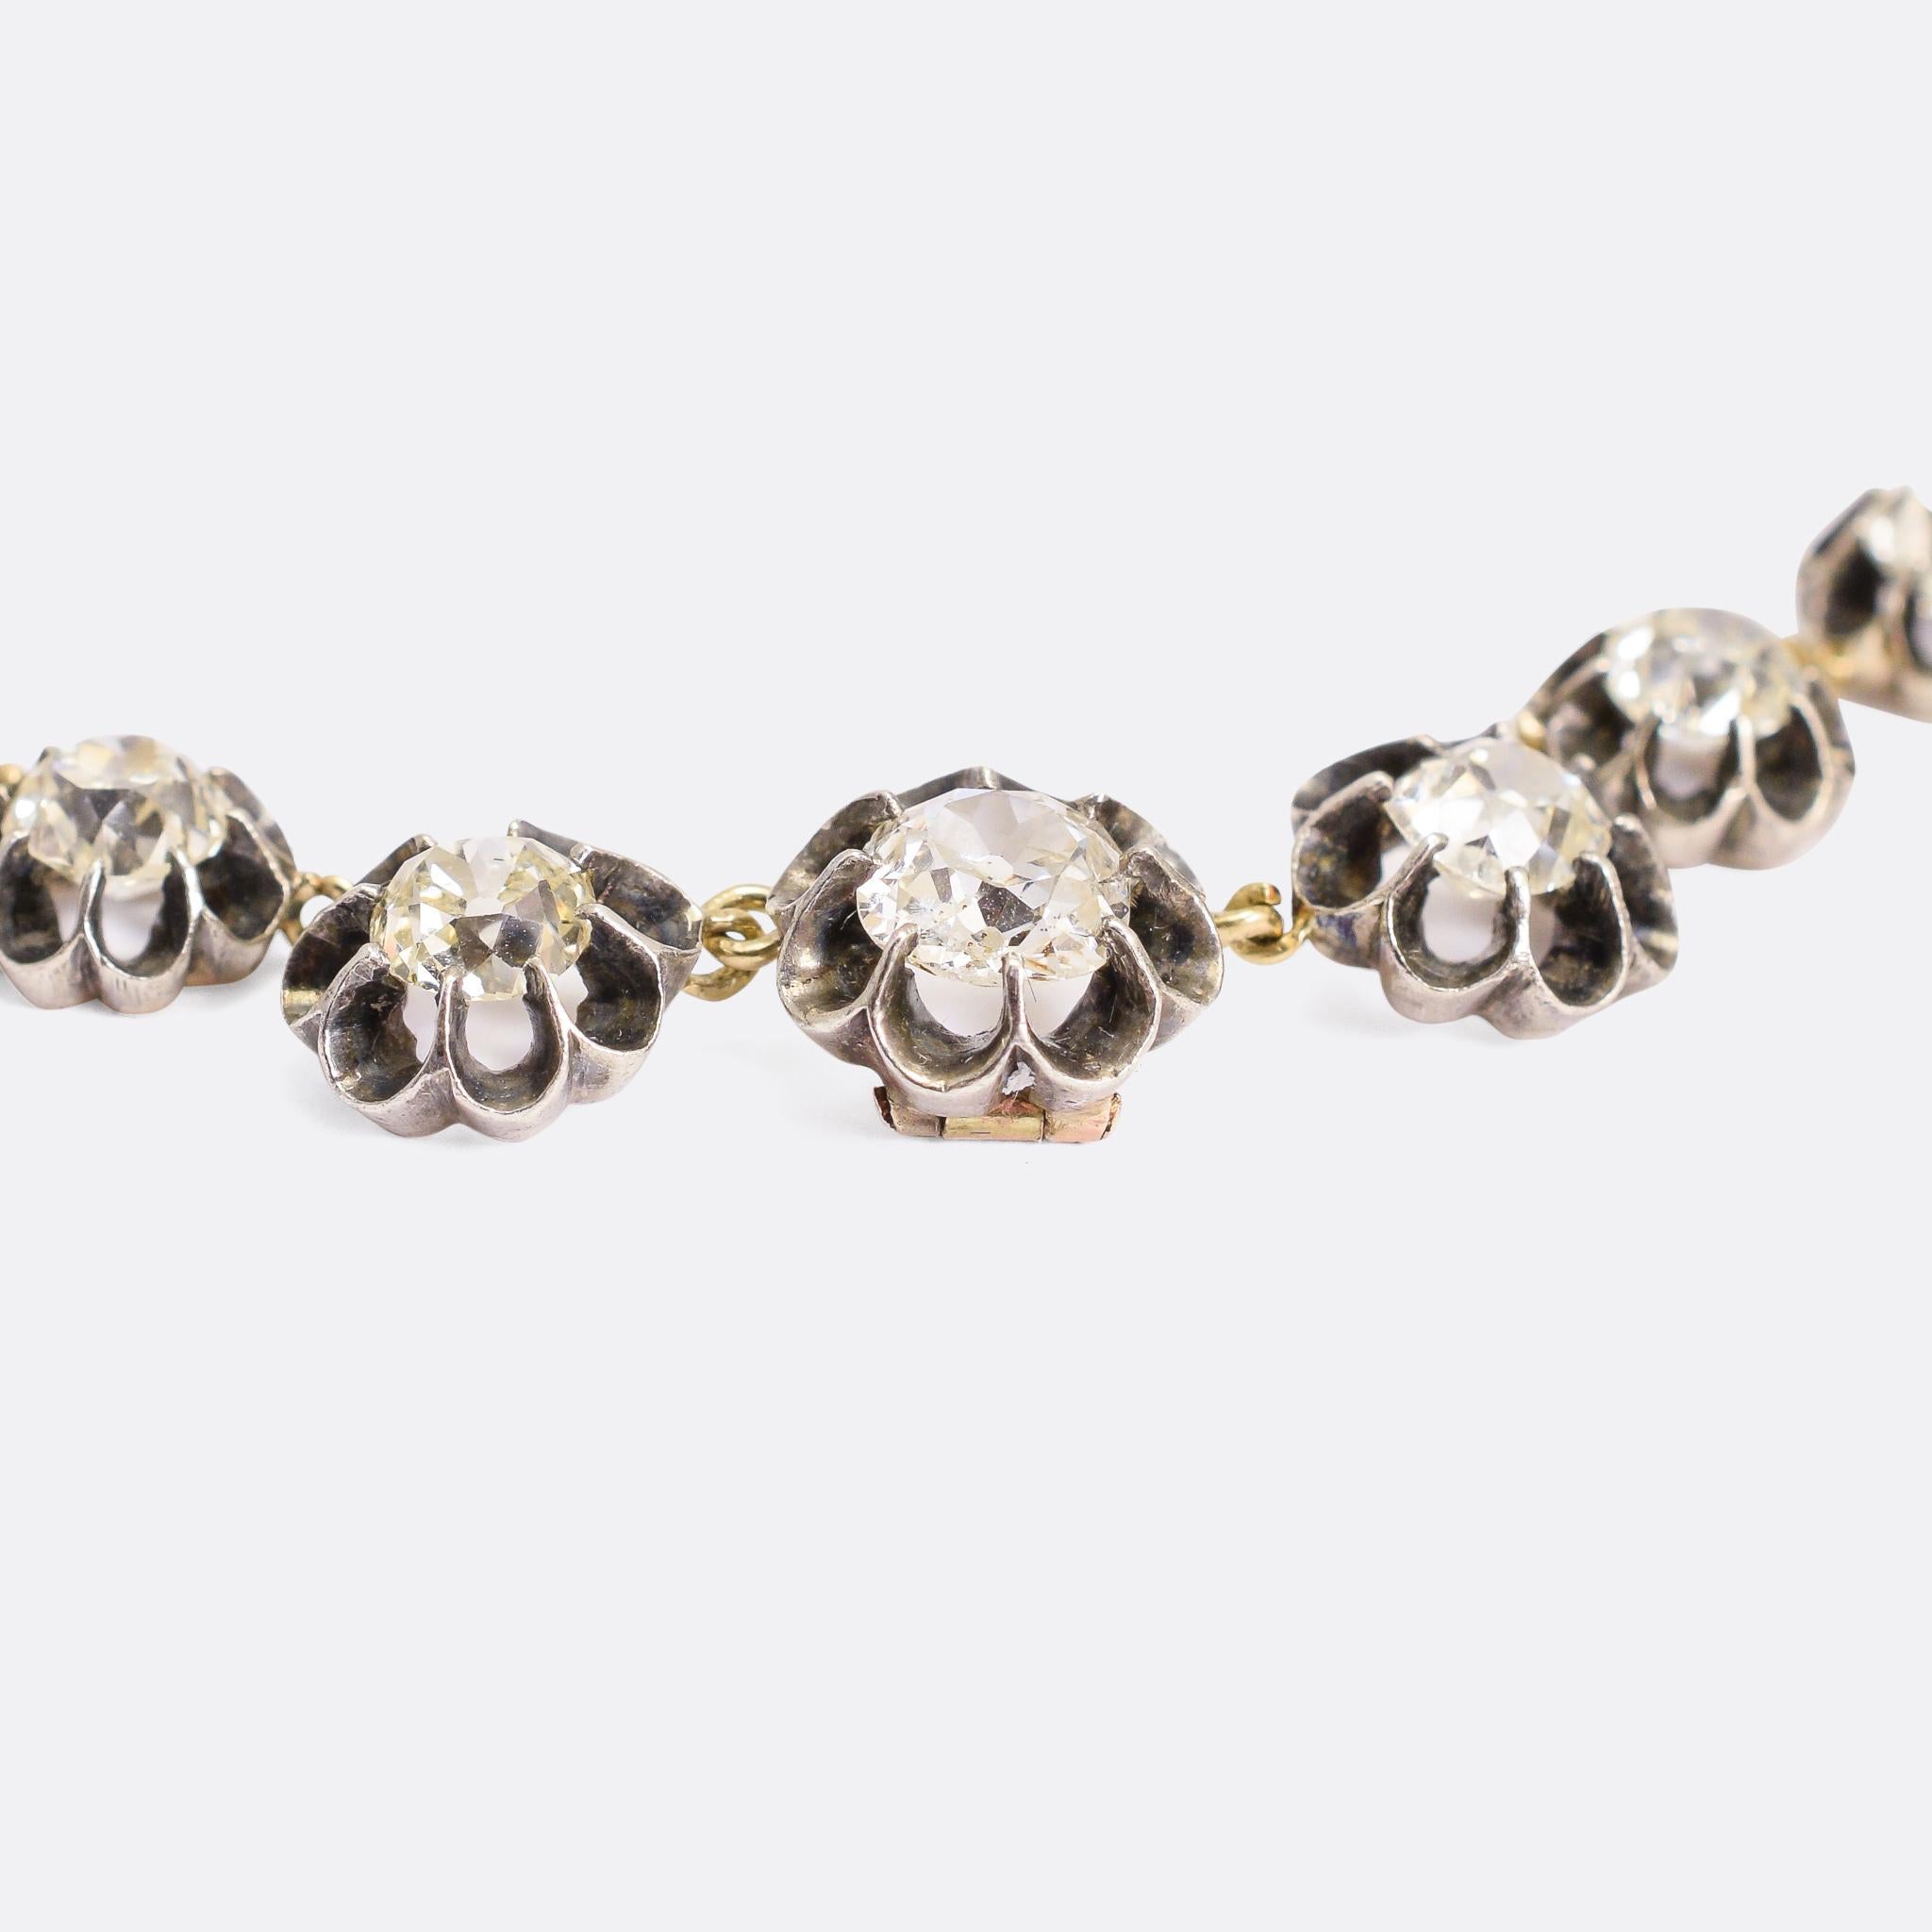 A spectacular  rivière necklace set with over 13 carats of chunky old mine cut diamonds. The stones rest in gorgeous scalloped claw settings modelled in sterling silver with gold backs and joining links. It dates from the 19th Century, circa 1890,